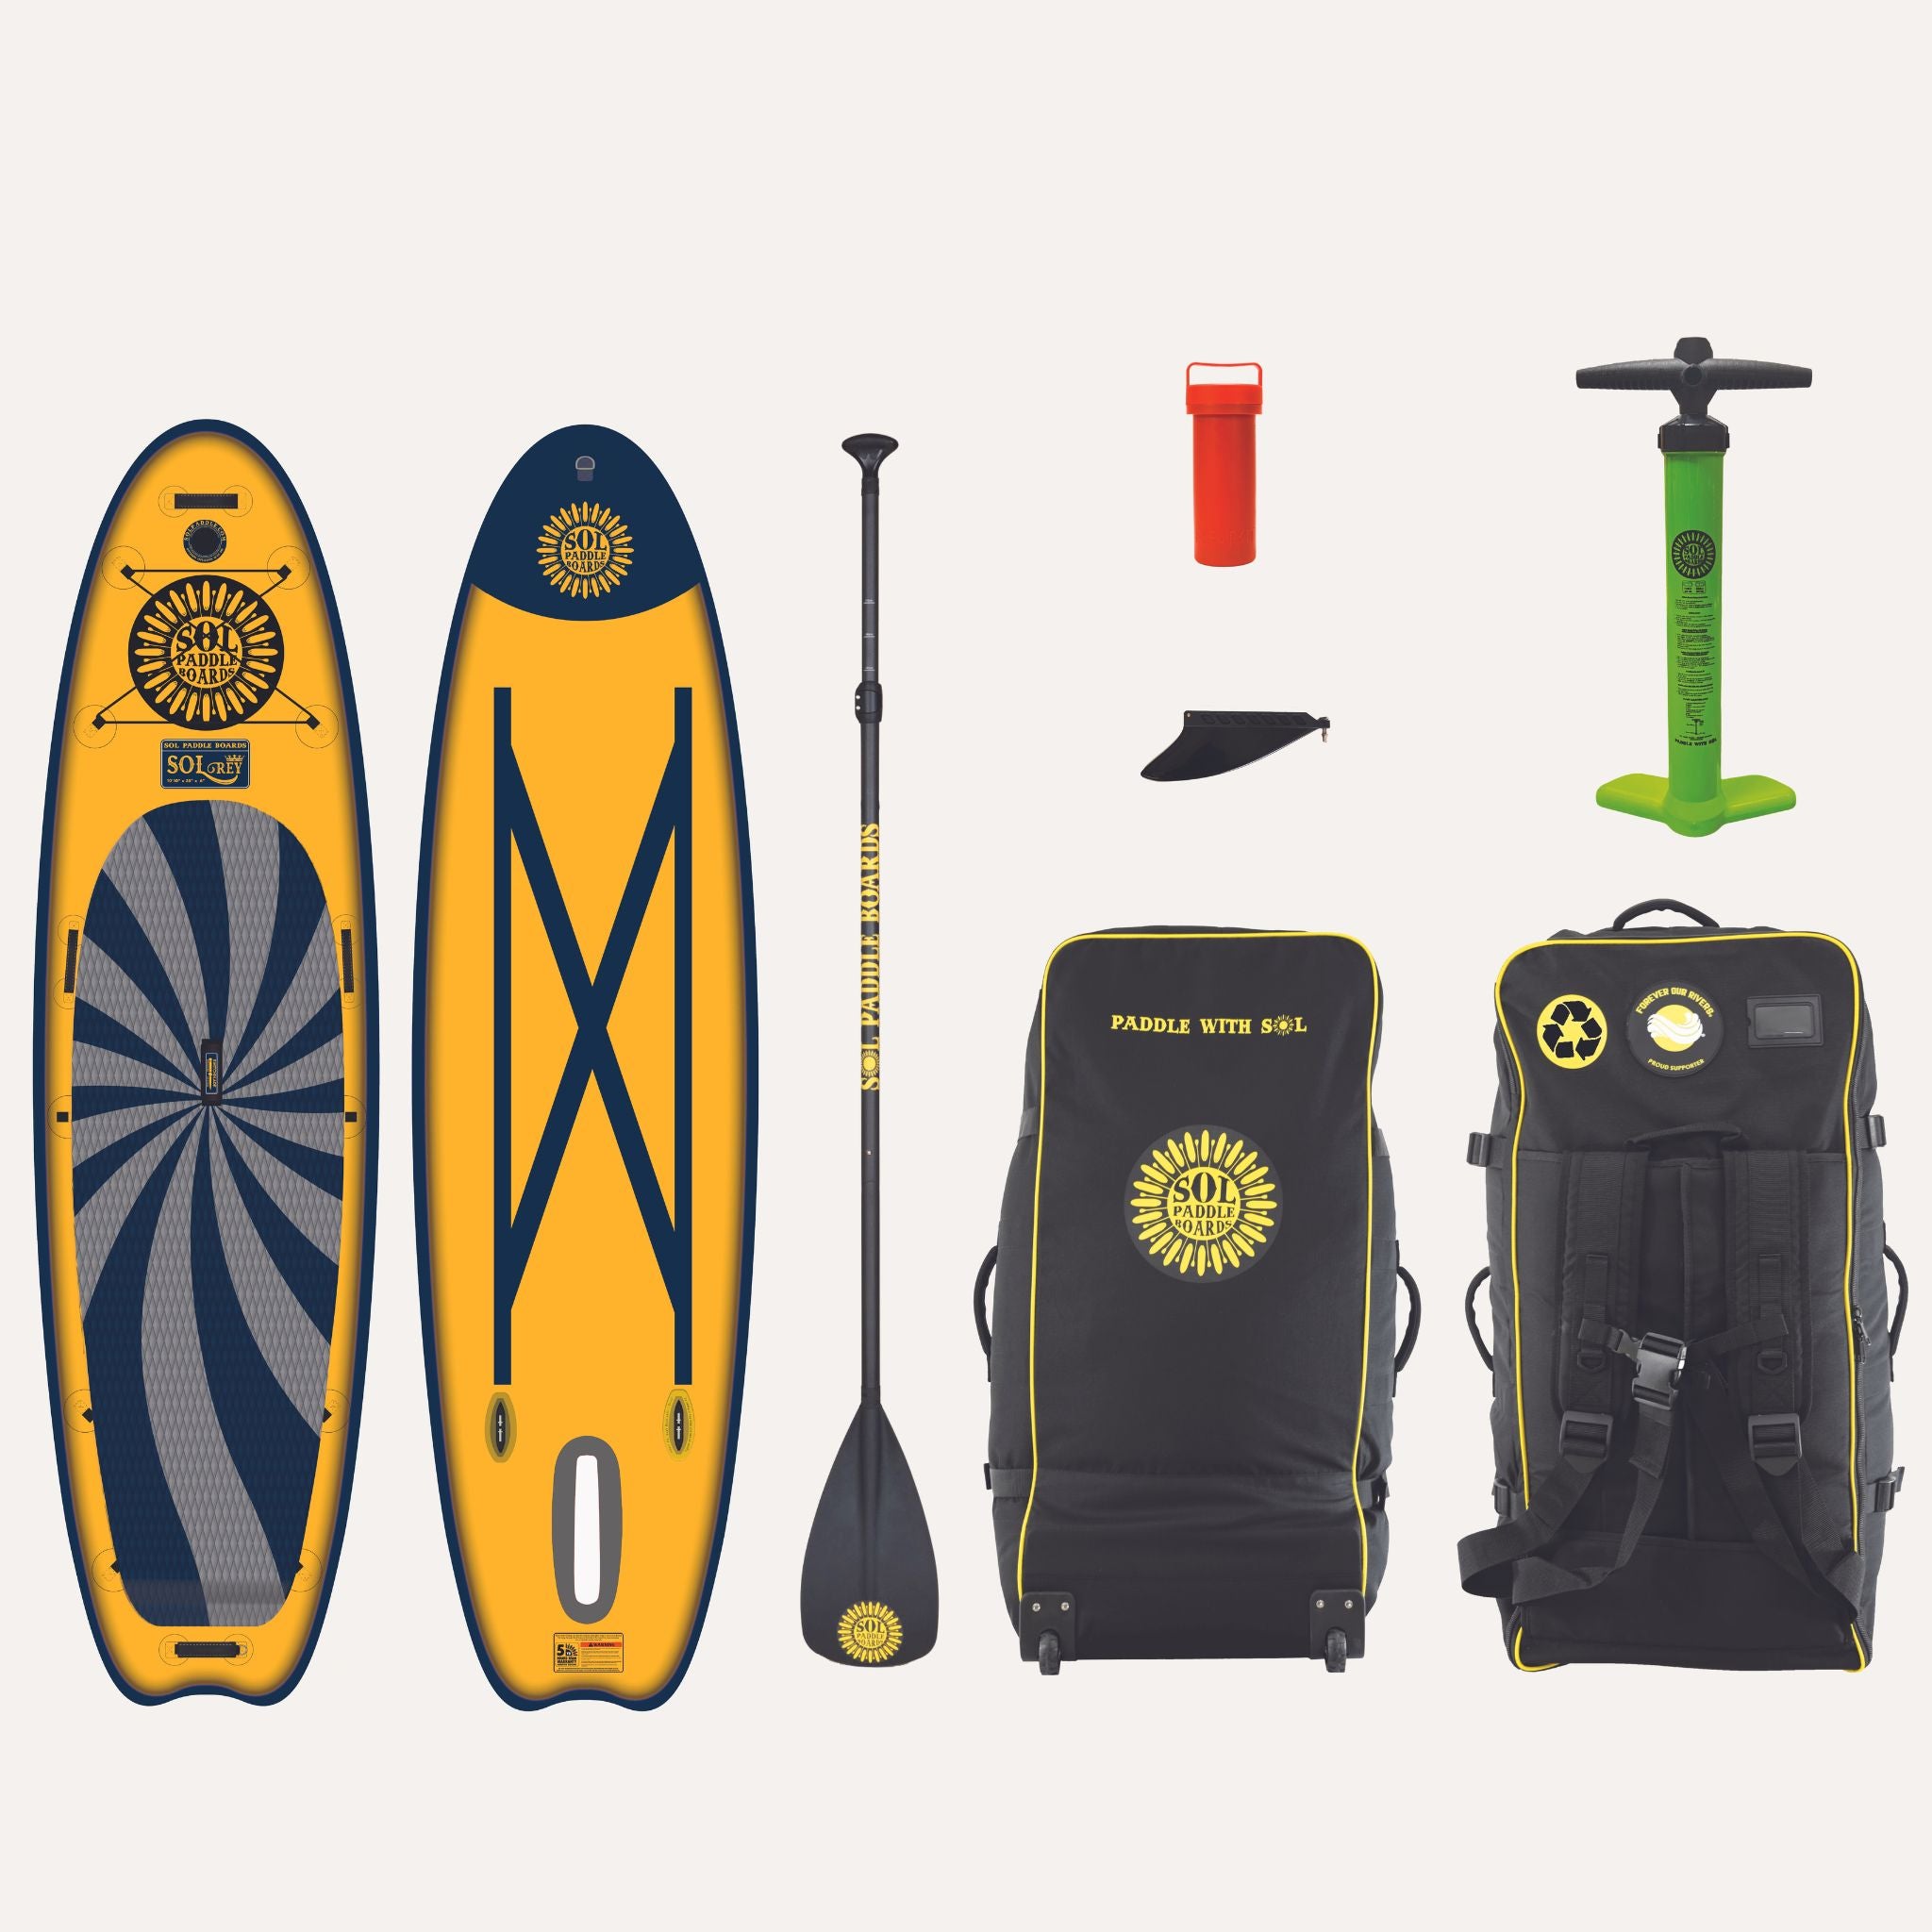 GalaXy SOLrey Inflatable Paddle Board showcasing the top and bottom views of the SUP board and the accessories that come with it